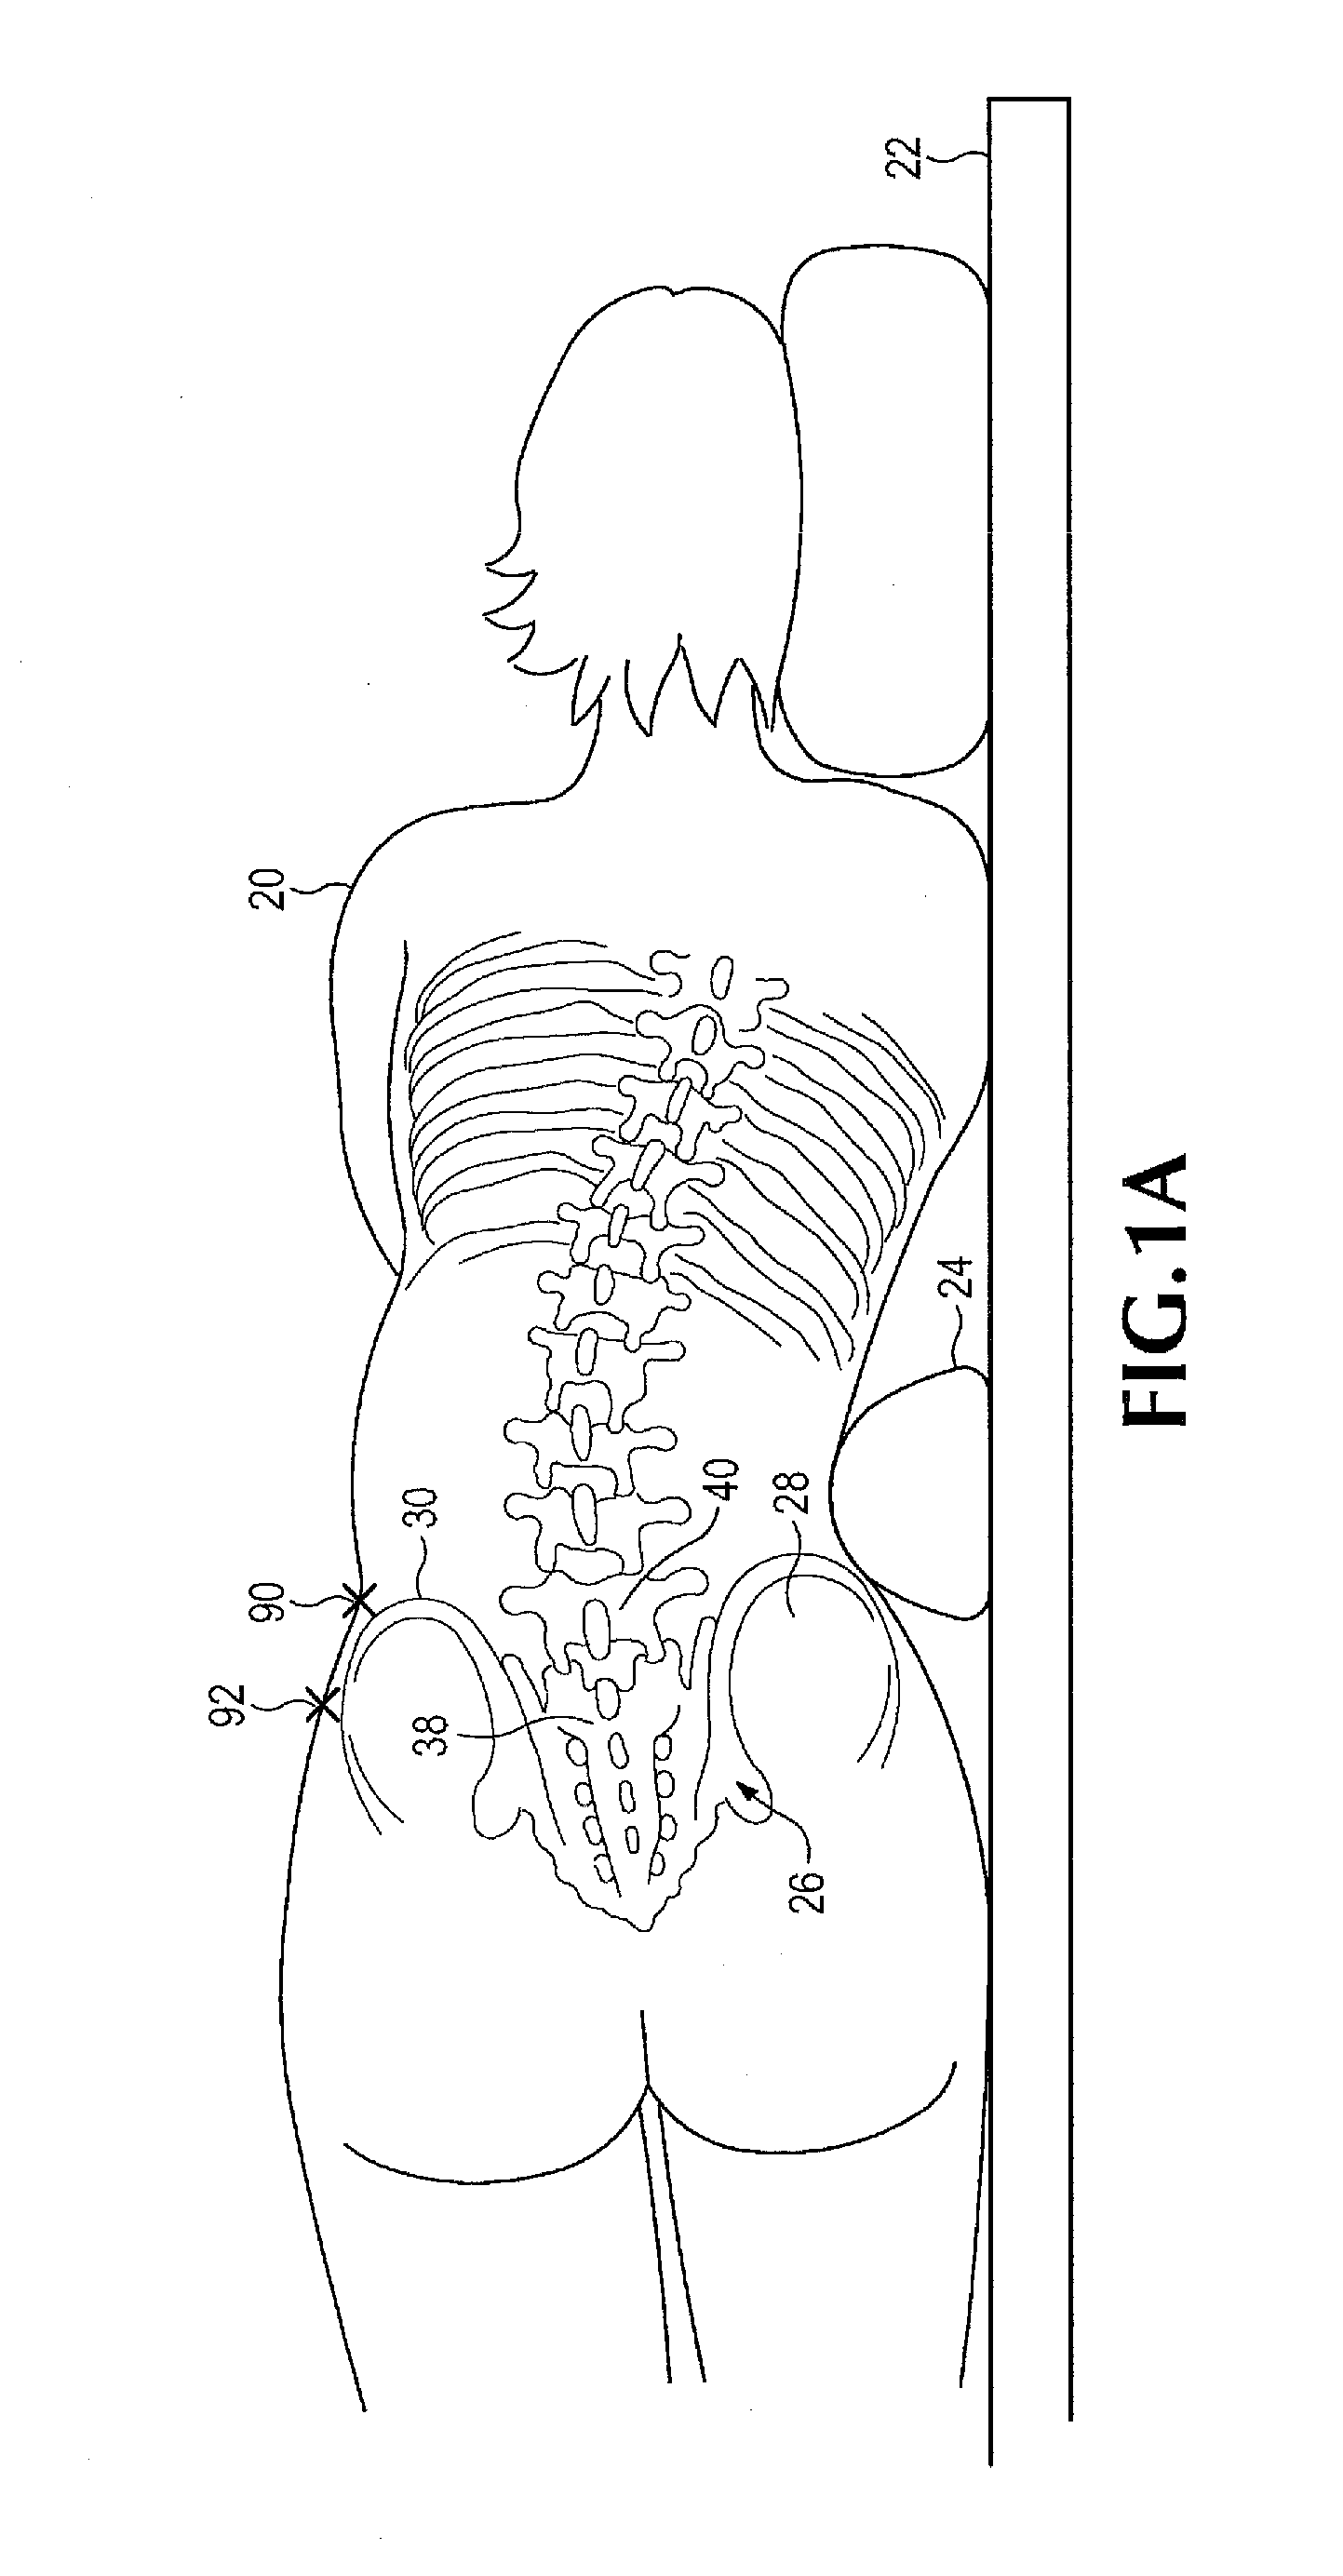 Method of retroperitoneal lateral insertion of spinal implants